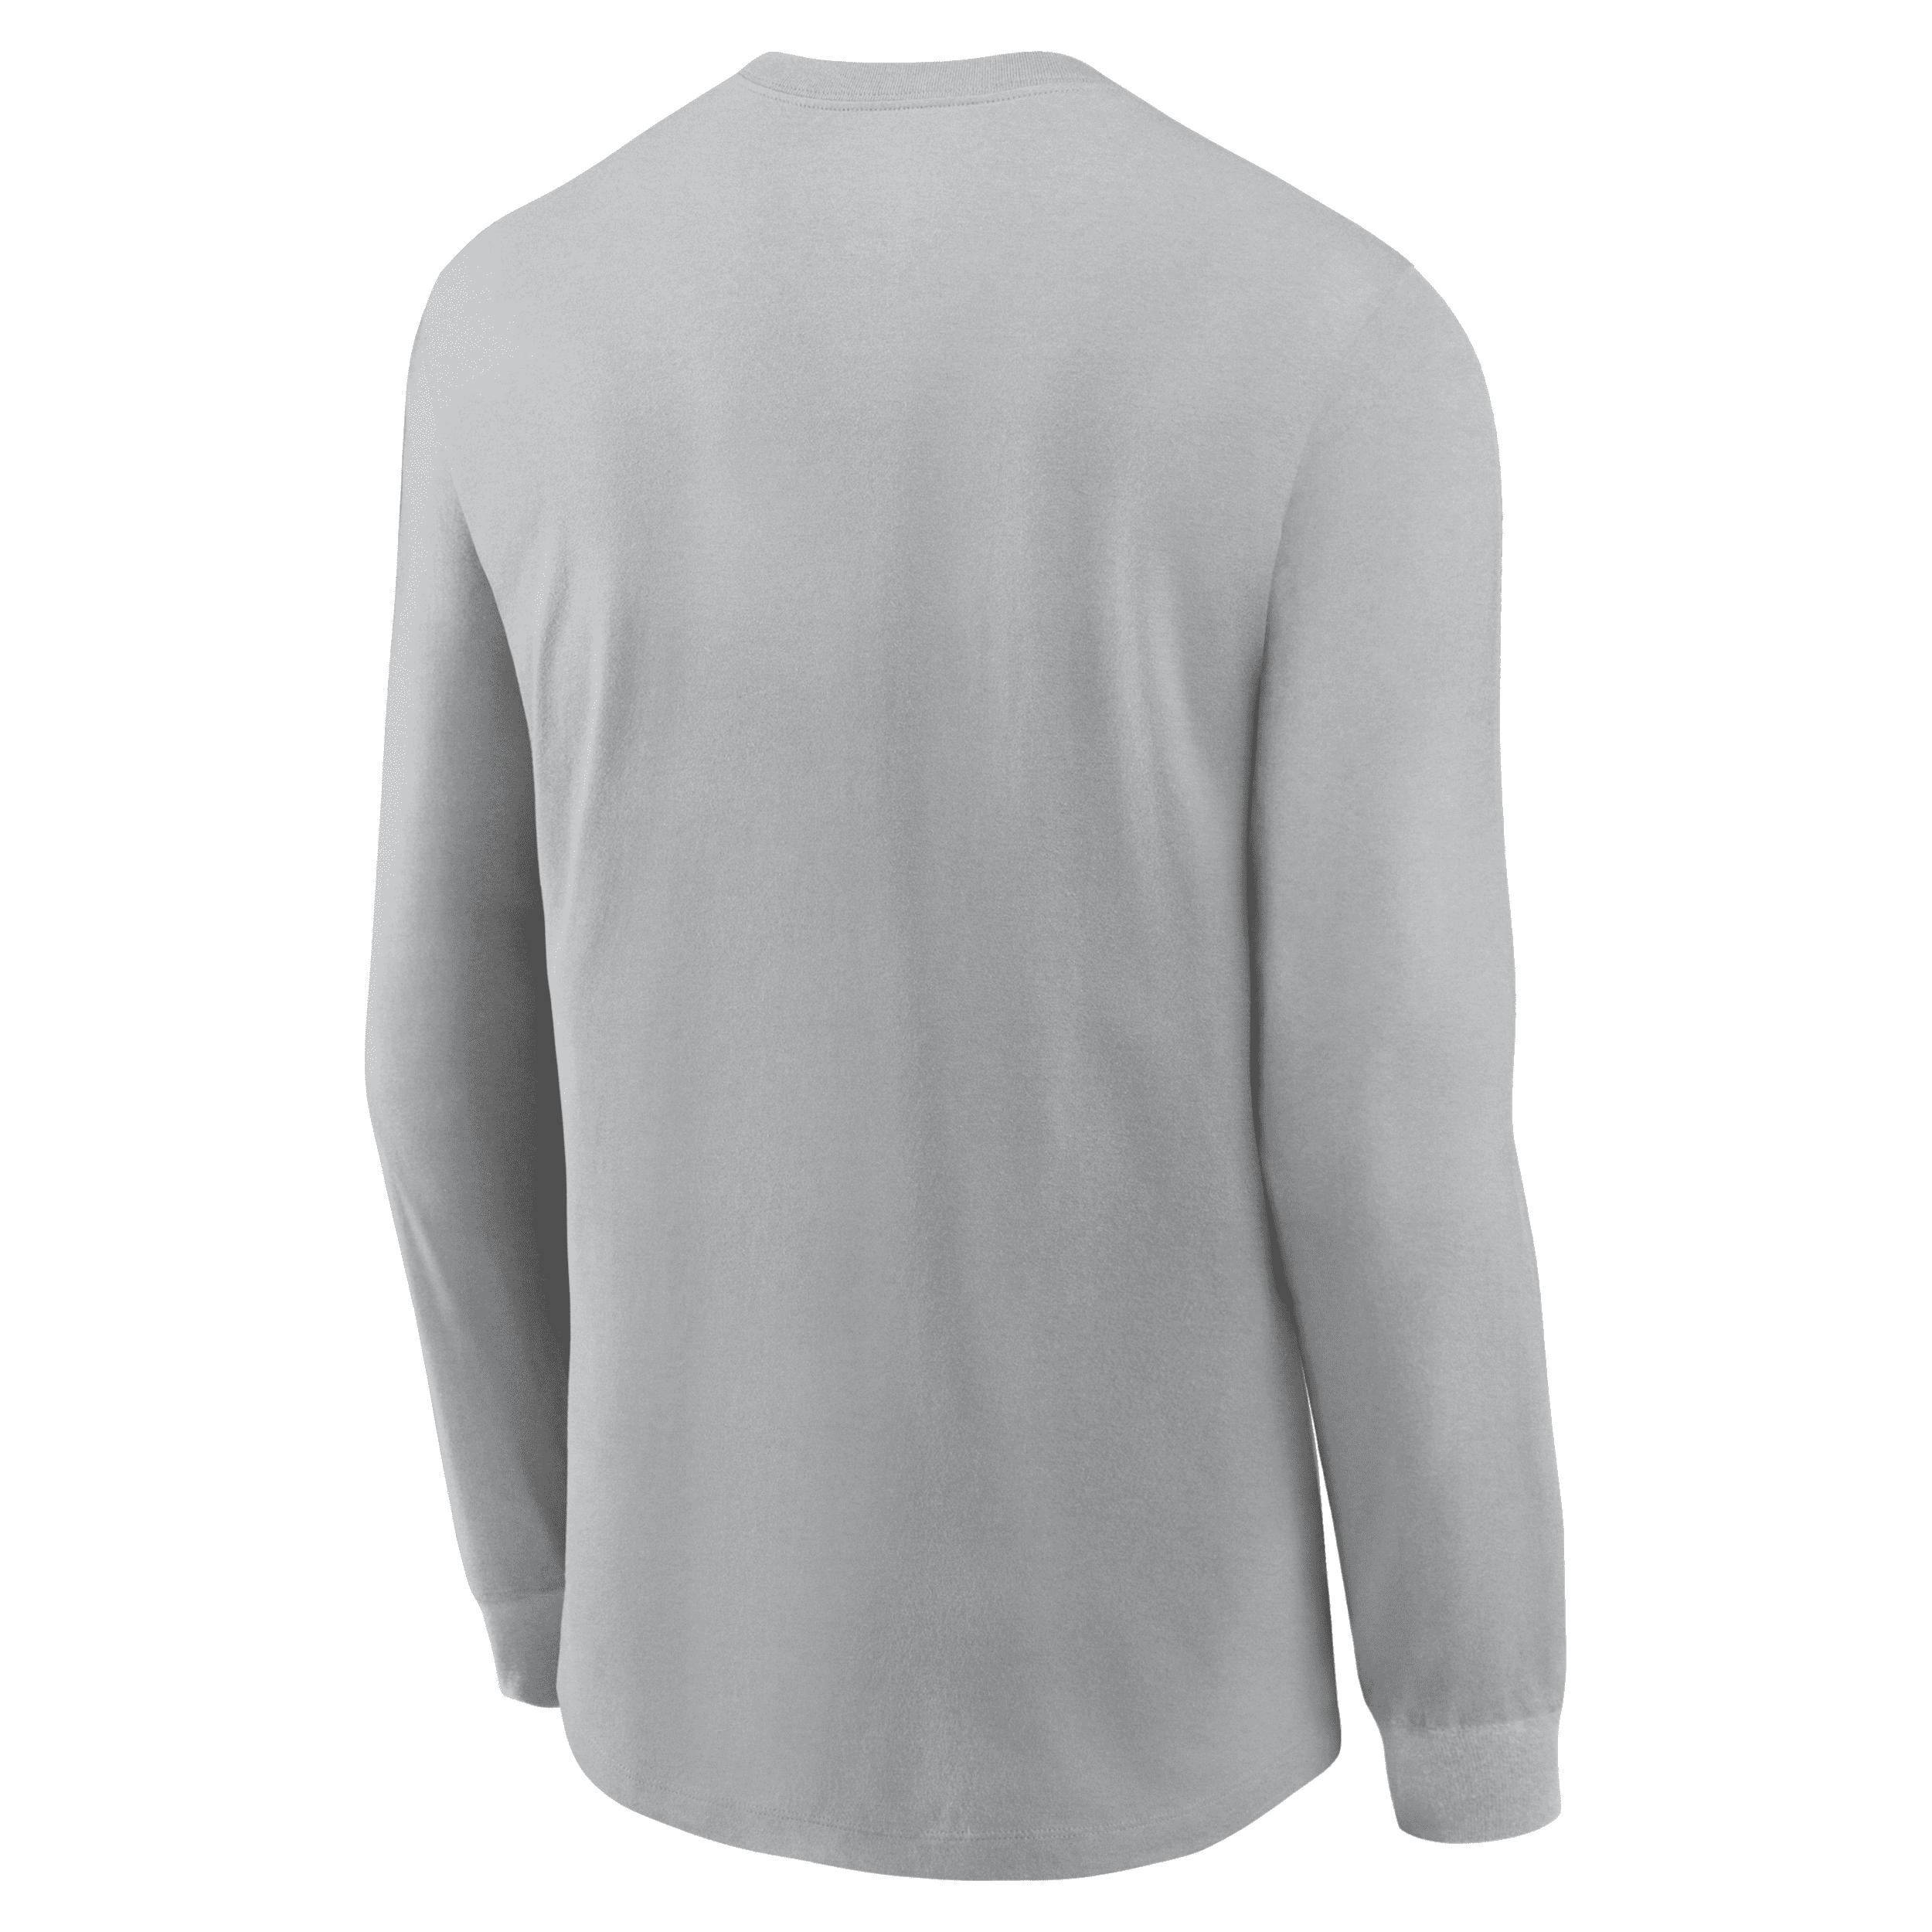 Nike Dri-FIT Sideline Velocity (NFL Los Angeles Chargers) Men's Long-Sleeve  T-Shirt.